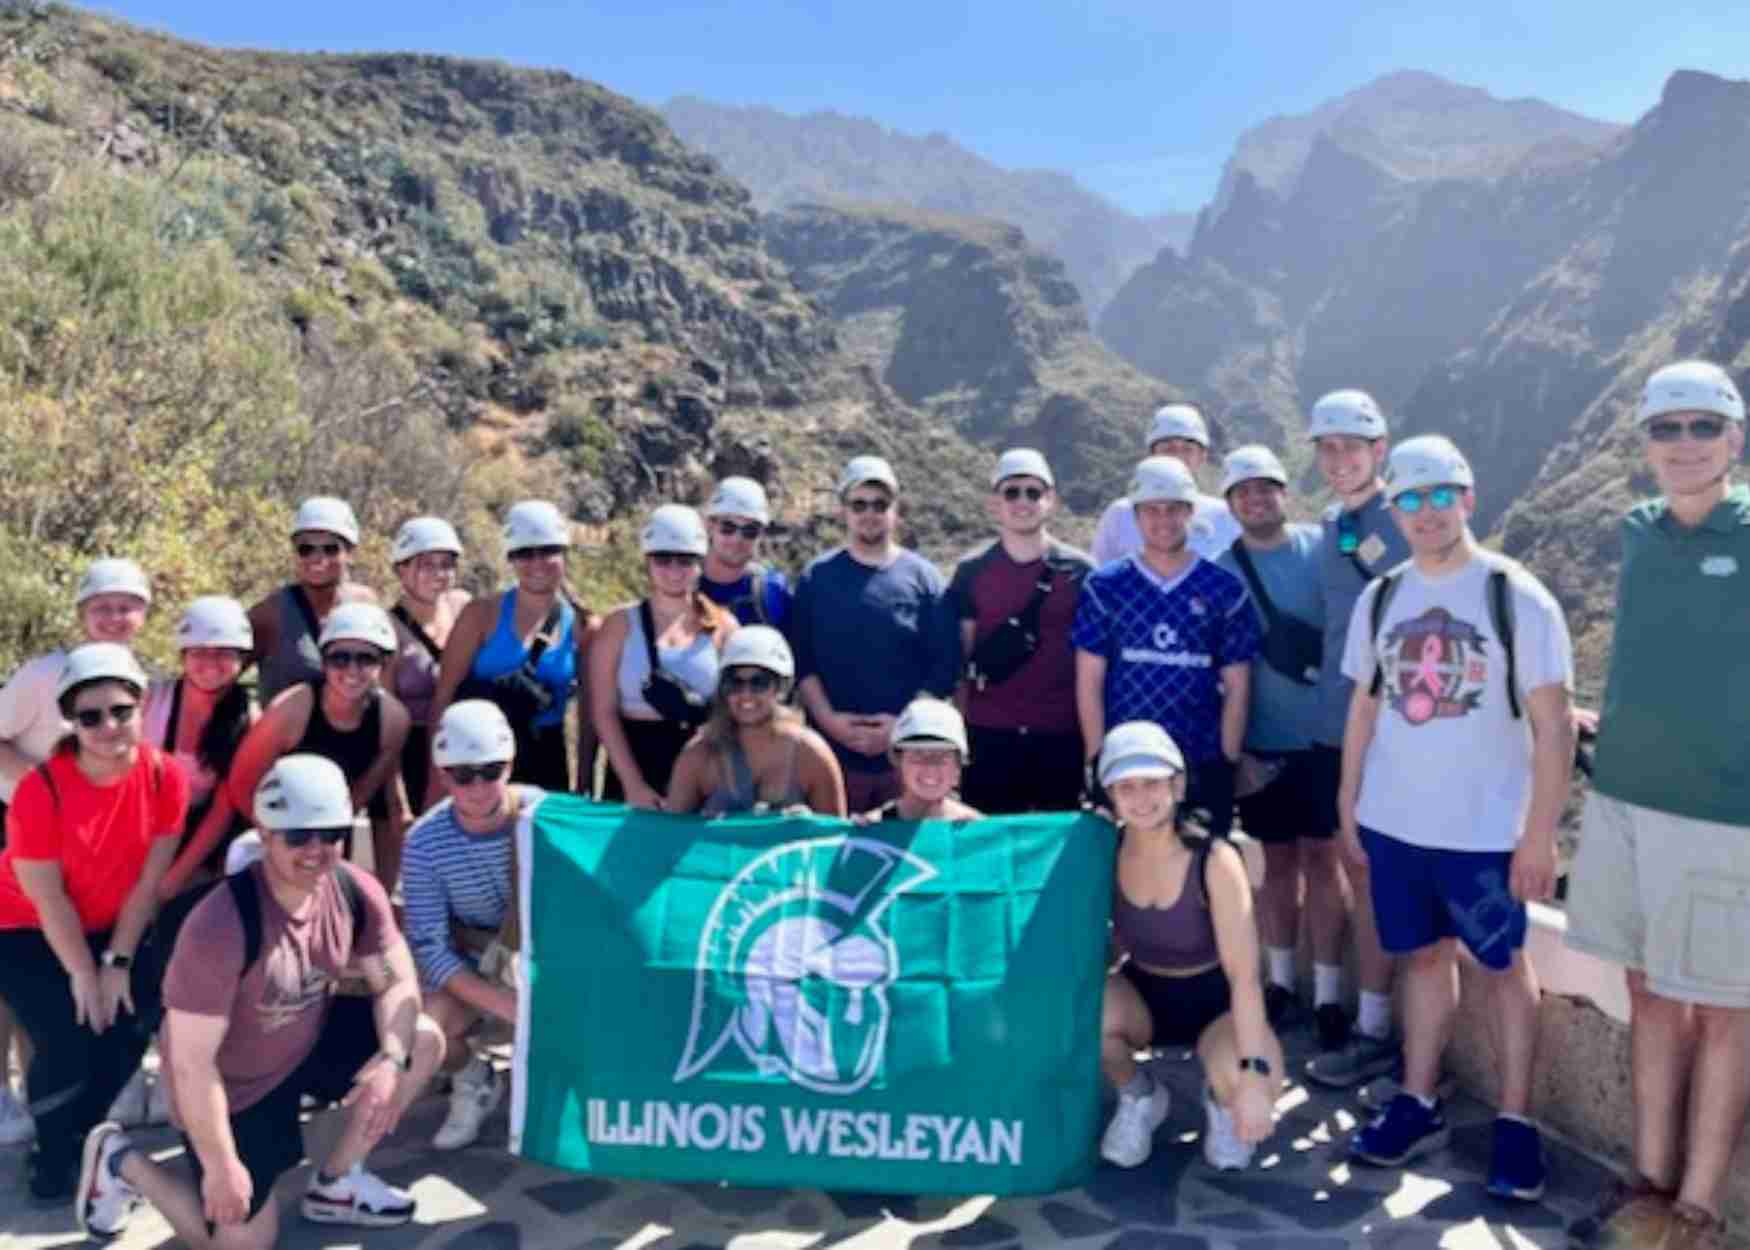 Group of students hold IWU flag against mountain backdrop during travel seminar visit to Canary Islands